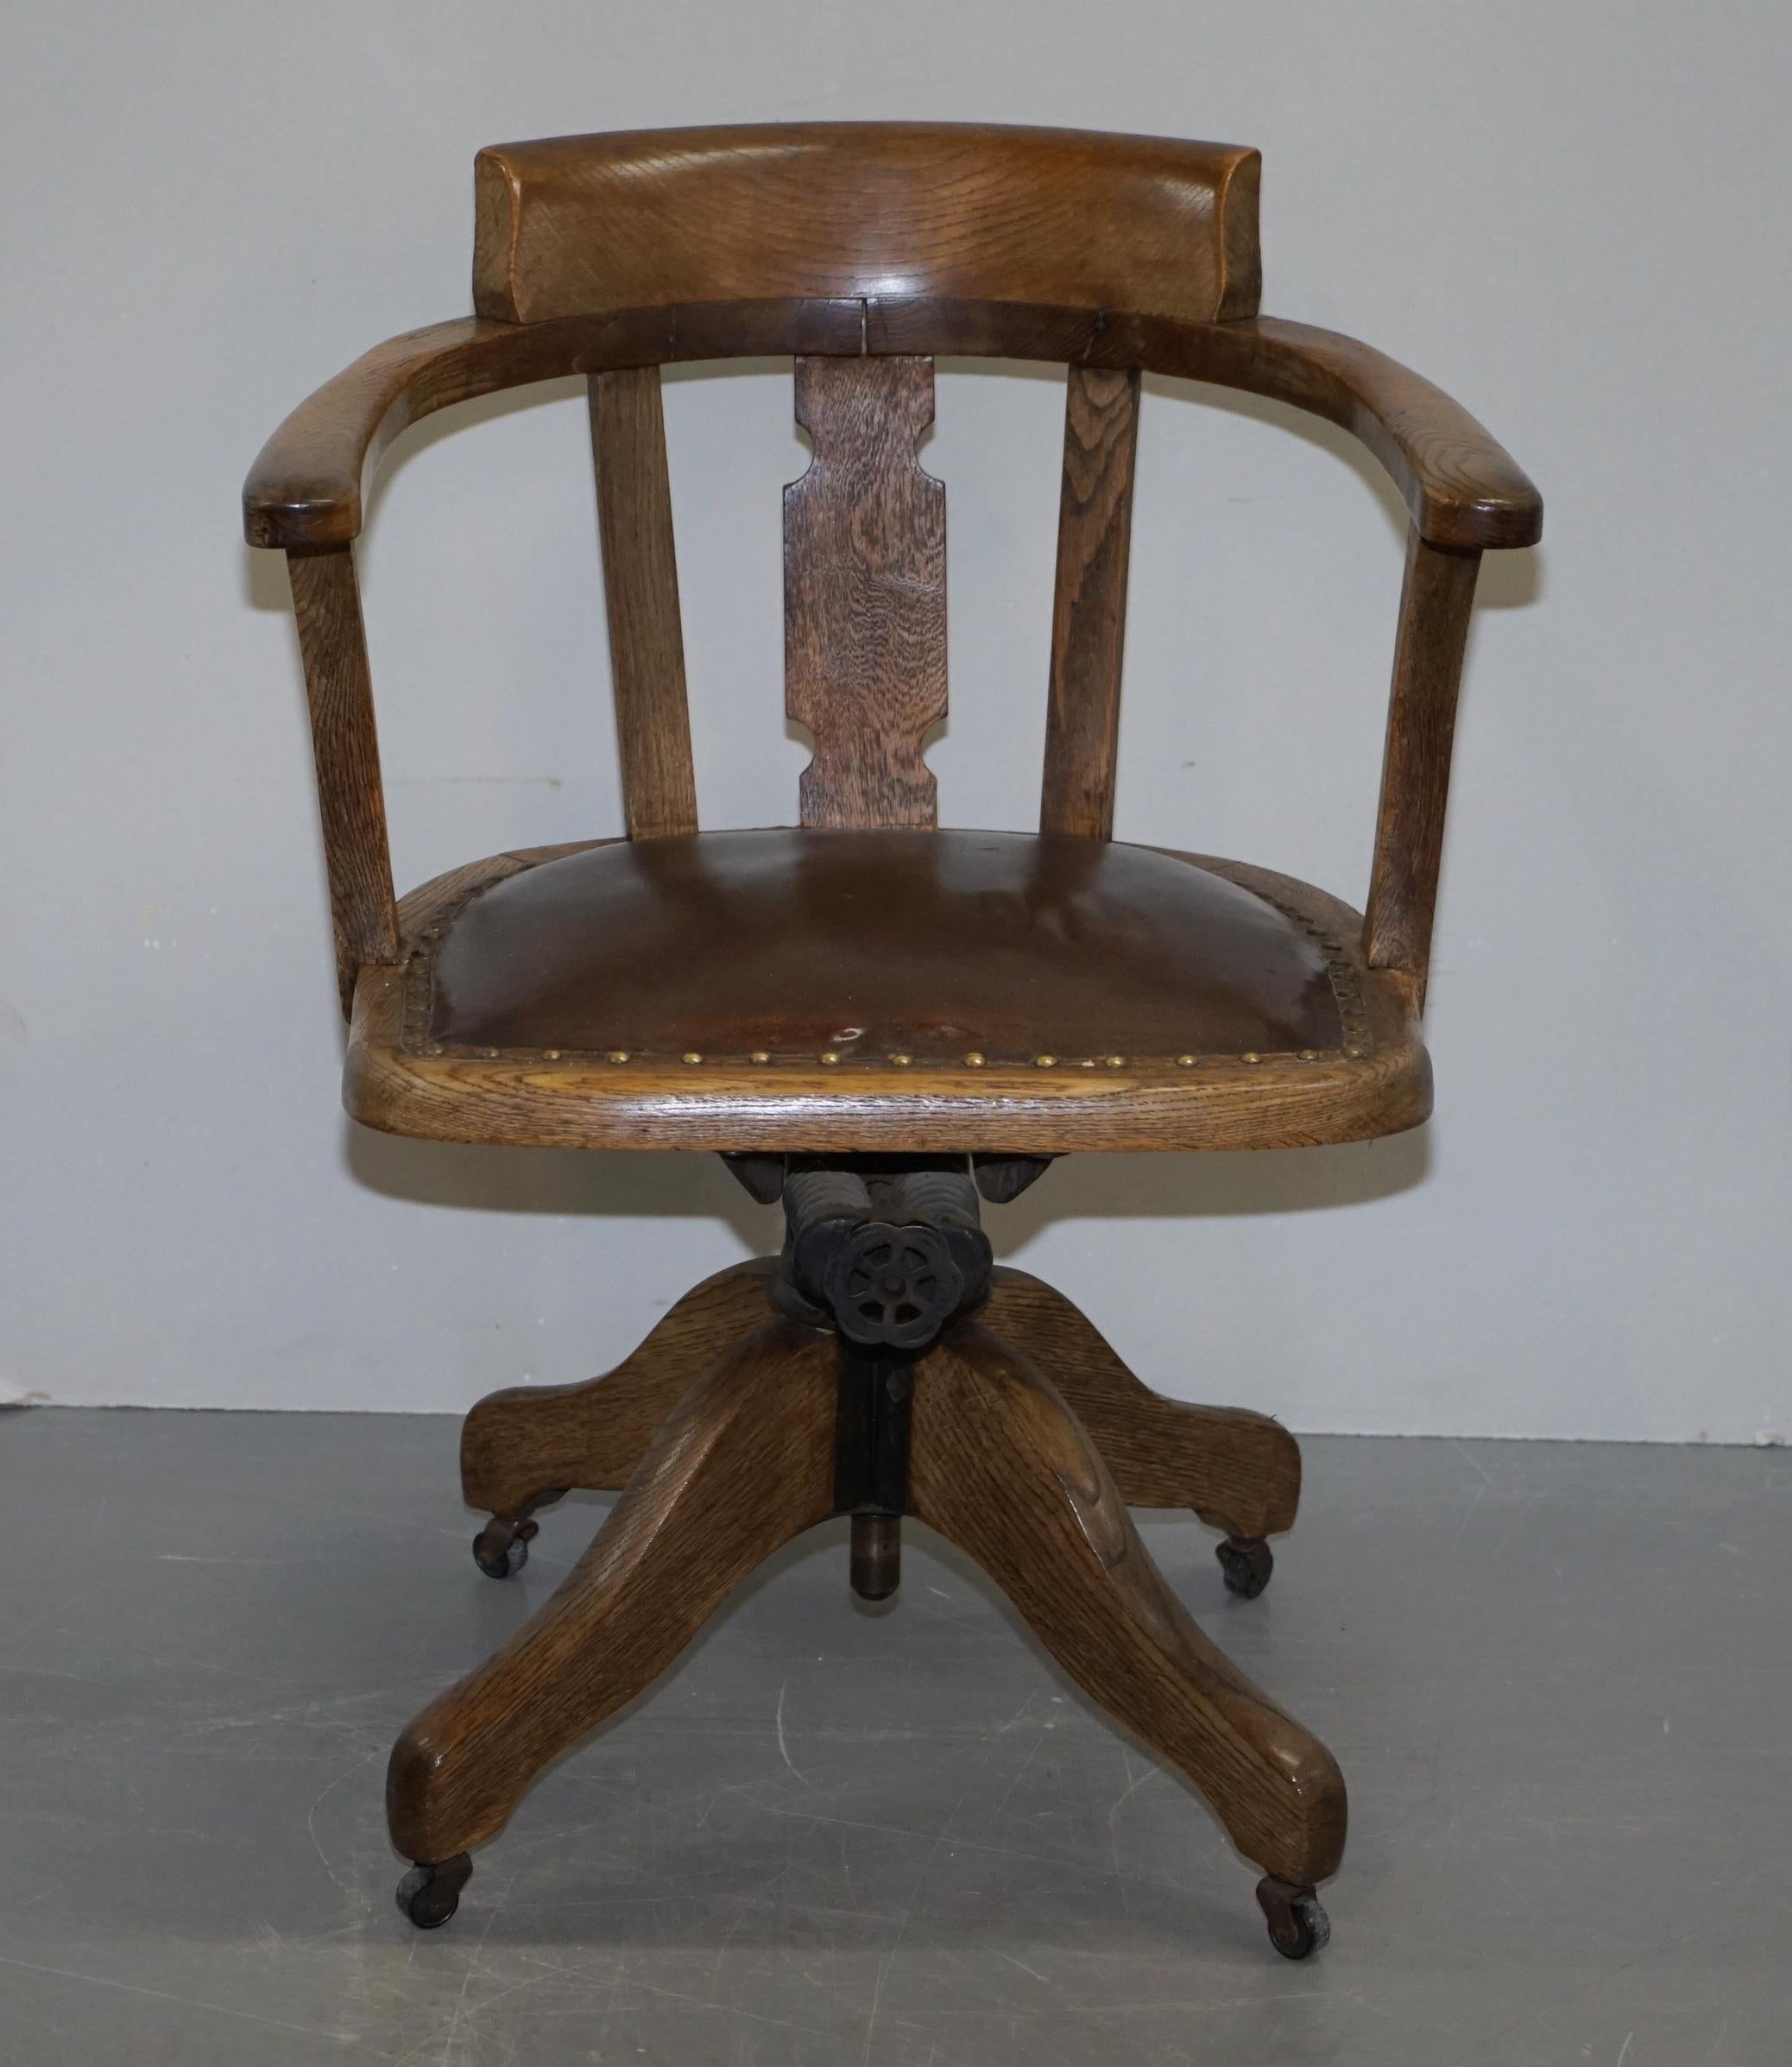 We are delighted to offer for sale this restored circa 1900 directors armchair 

This chair is really quite exquisite, it has a tiger oak frame which means the timber was cut on the bias to give it that lovely stripy tiger patina. the seat is the